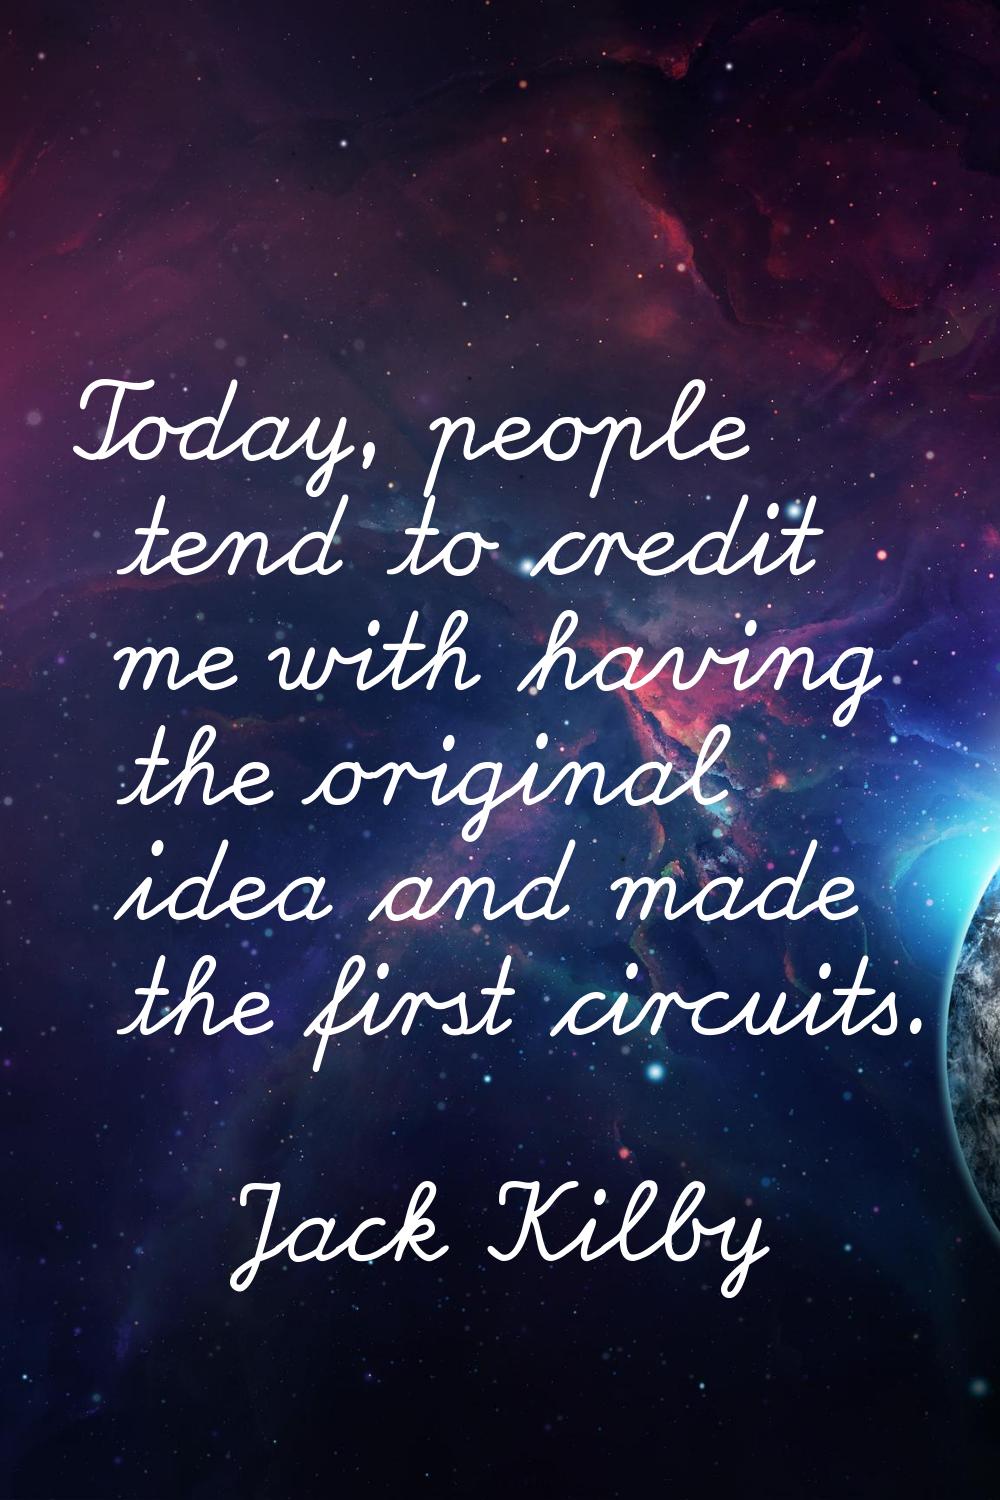 Today, people tend to credit me with having the original idea and made the first circuits.